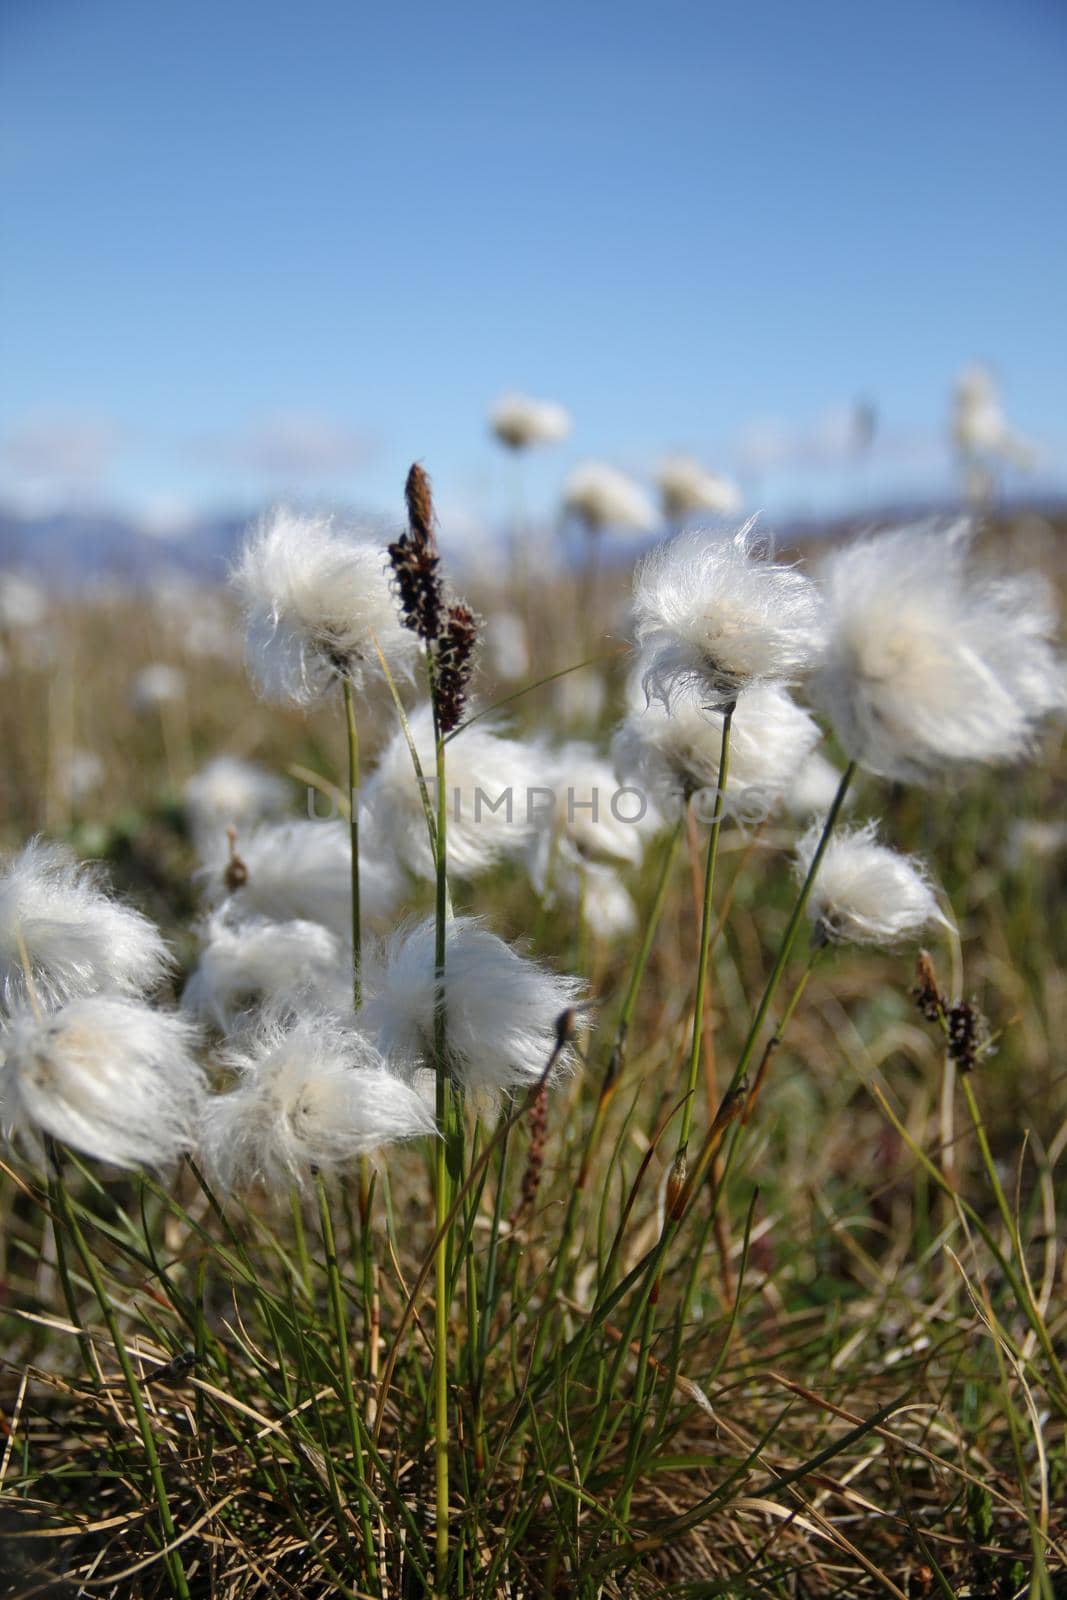 Eriophorum callitrix, commonly known as Arctic cotton, Arctic cottongrass, suputi, or pualunnguat in Inuktitut, is a perennial Arctic plant in the sedge family, Cyperaceae. It is one of the most widespread flowering plants in the northern hemisphere and tundra regions